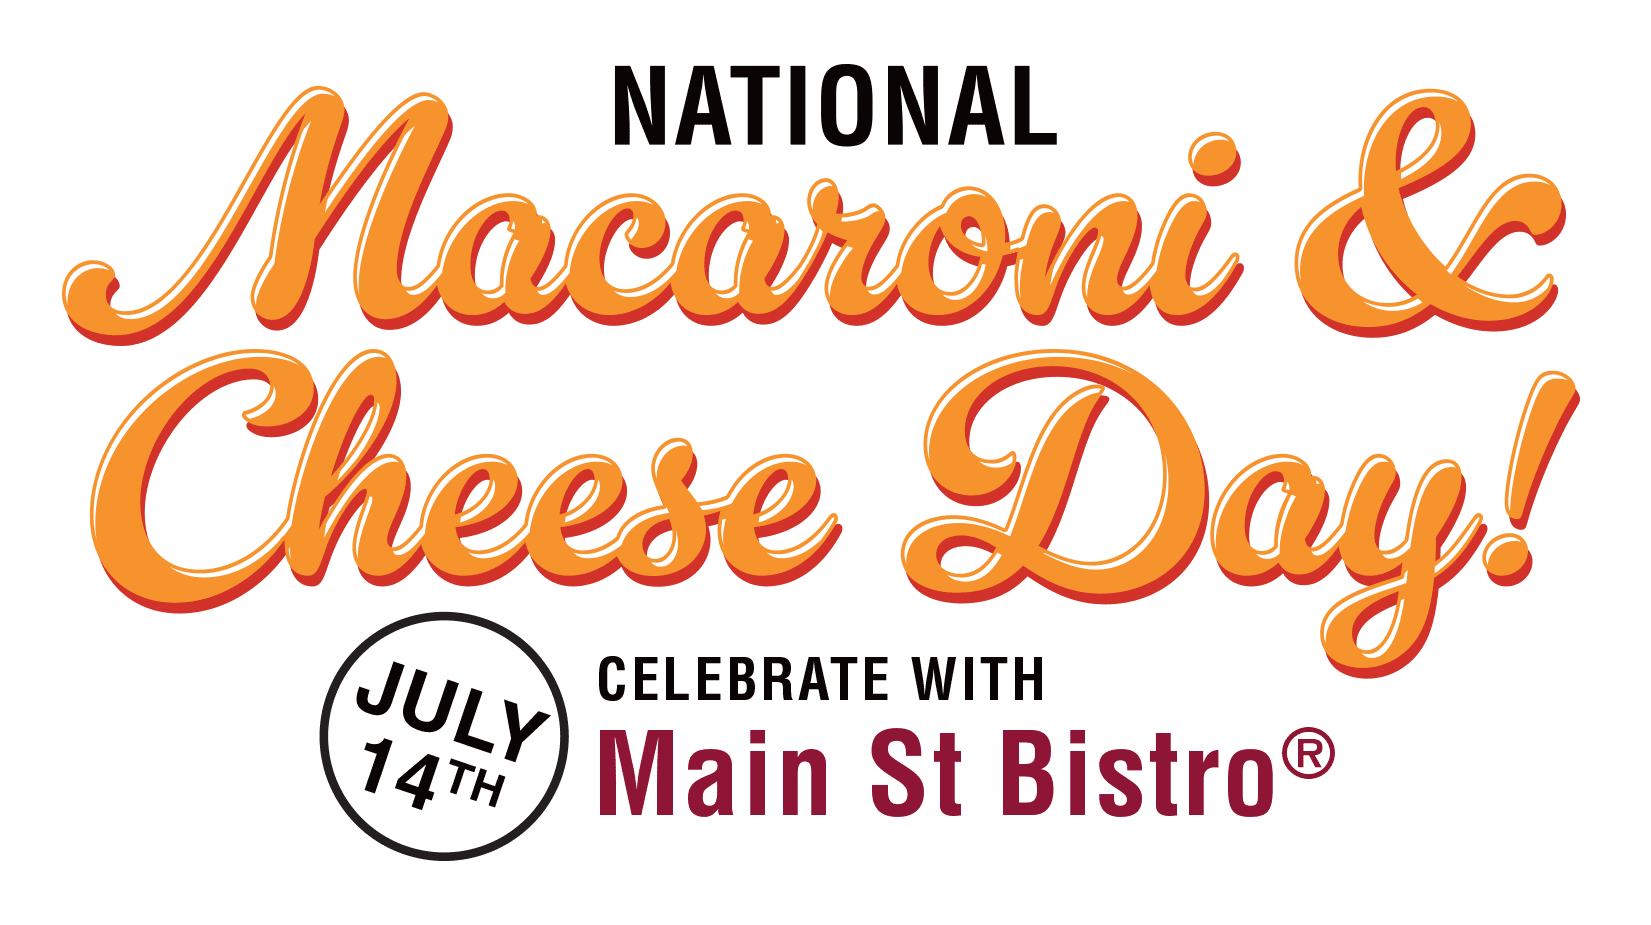 national mac and cheese day July 14th